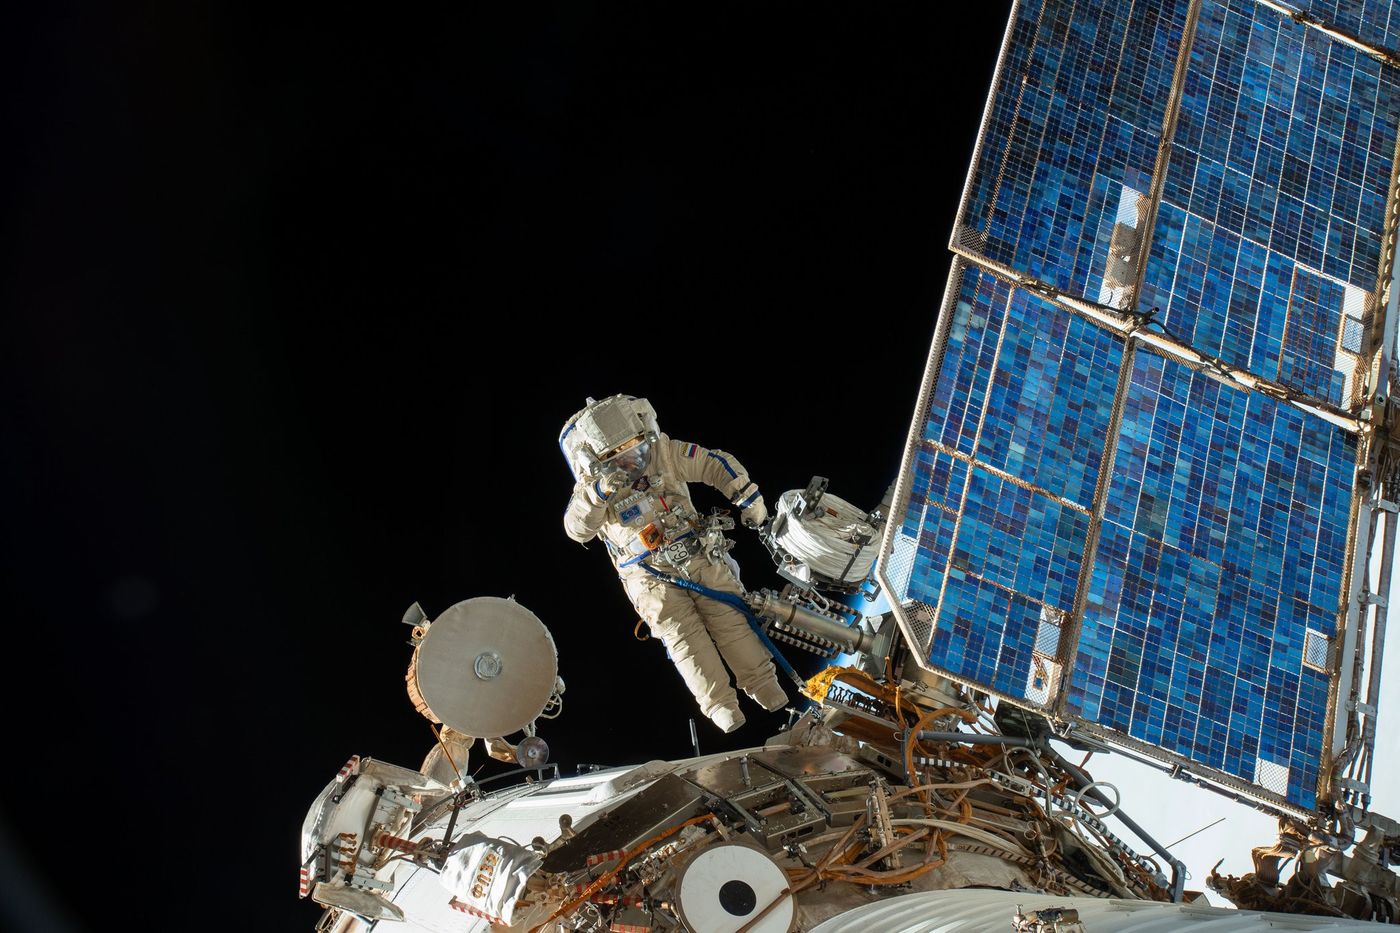 Two cosmonauts performed a spacewalk on Tuesday to study the site of the mysterious hole that caused an air leak in August.